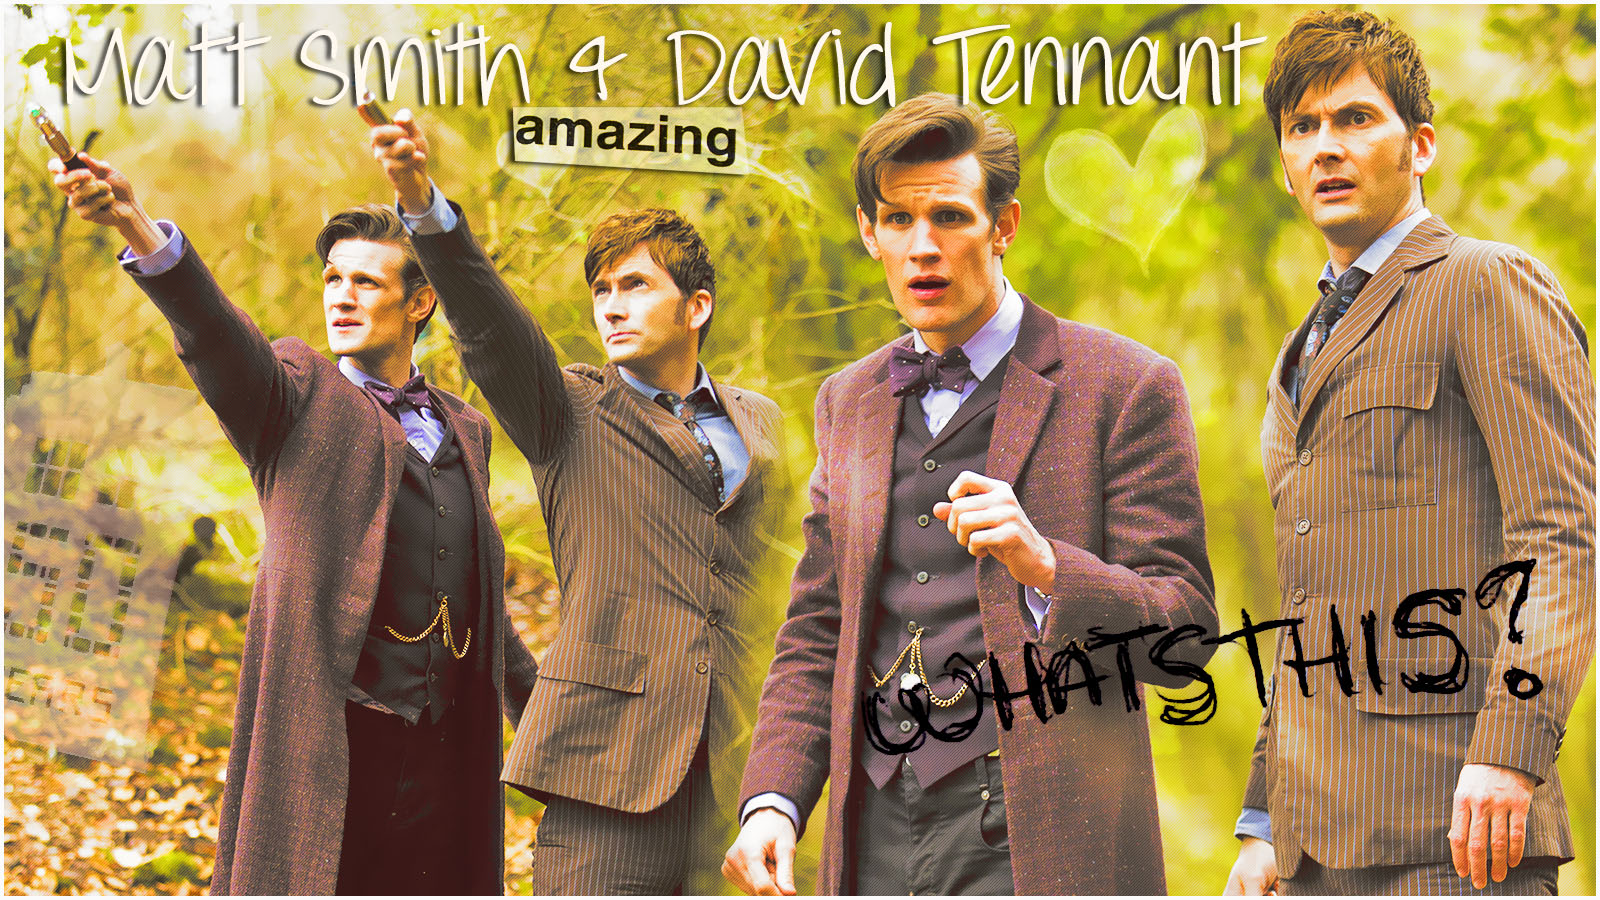 Doctor who matt smith and david tennant by anthony on